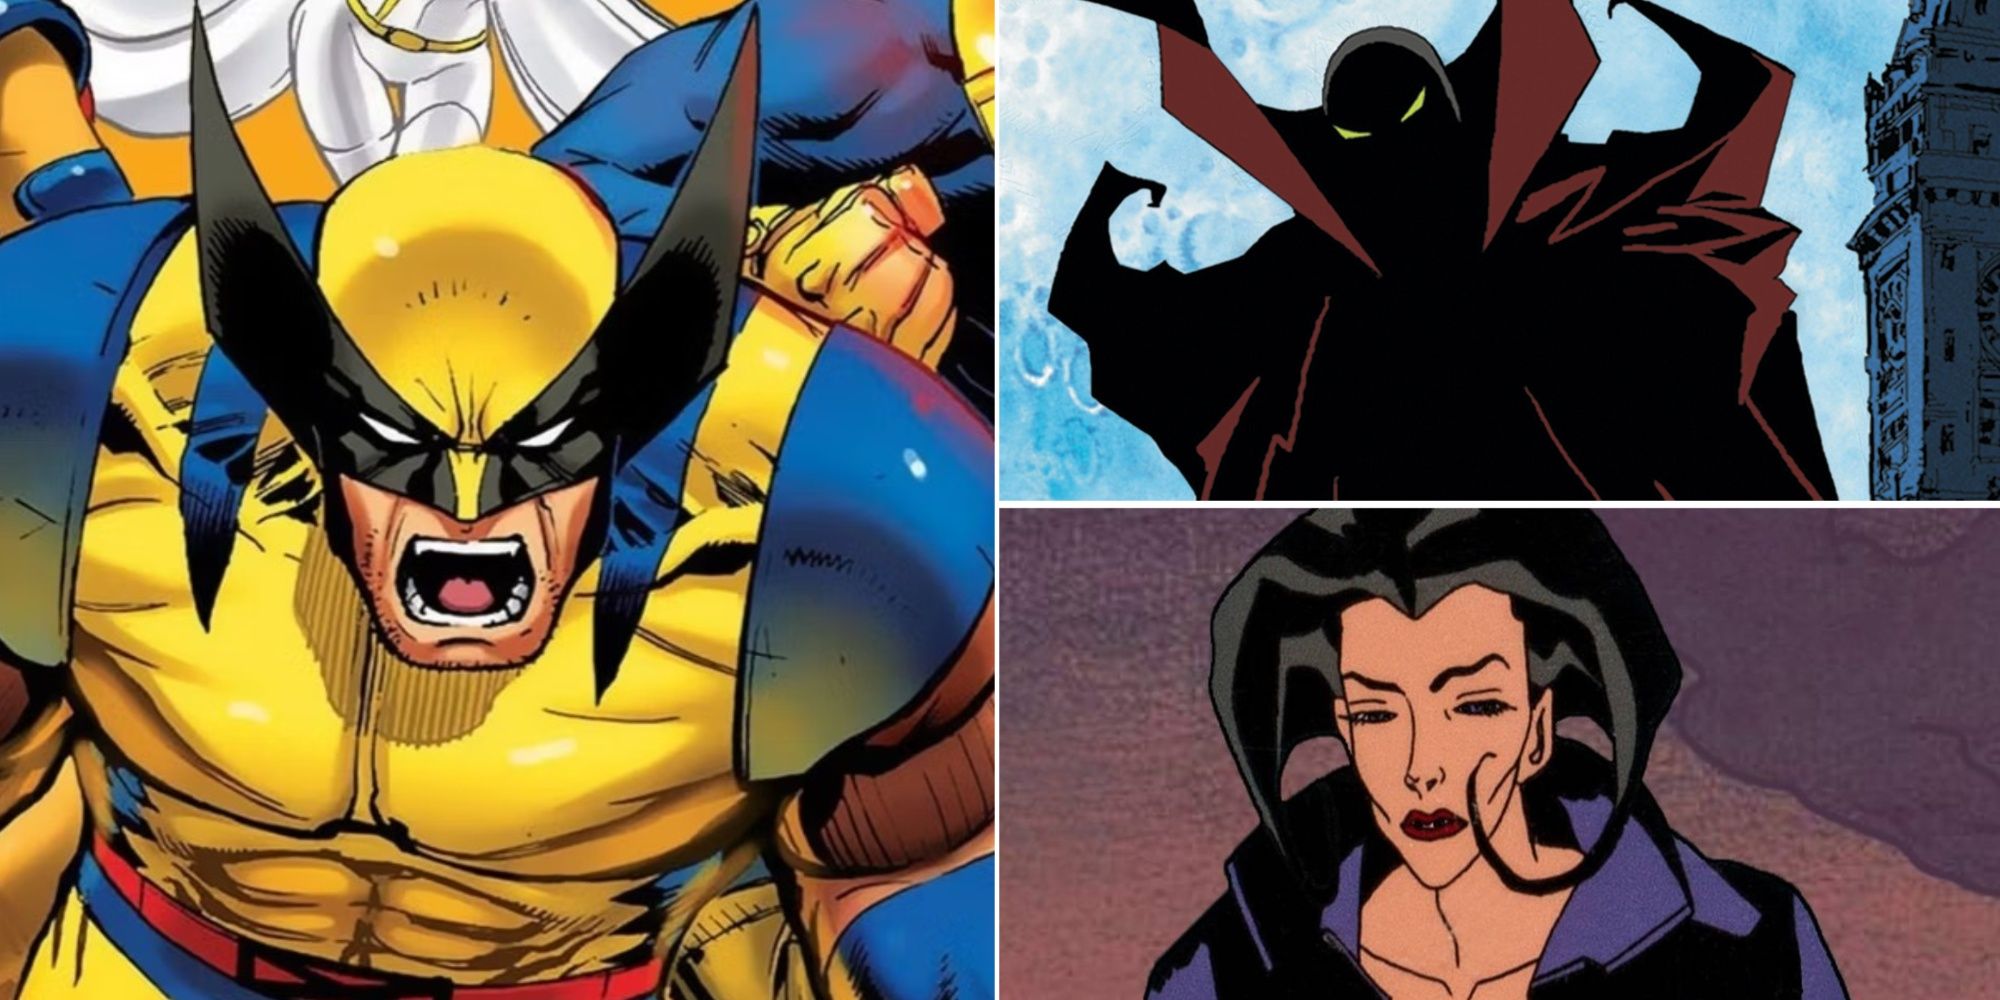 X-Men: The Animated Series, Todd McFarlane's Spawn, and Aeon Flux Featured